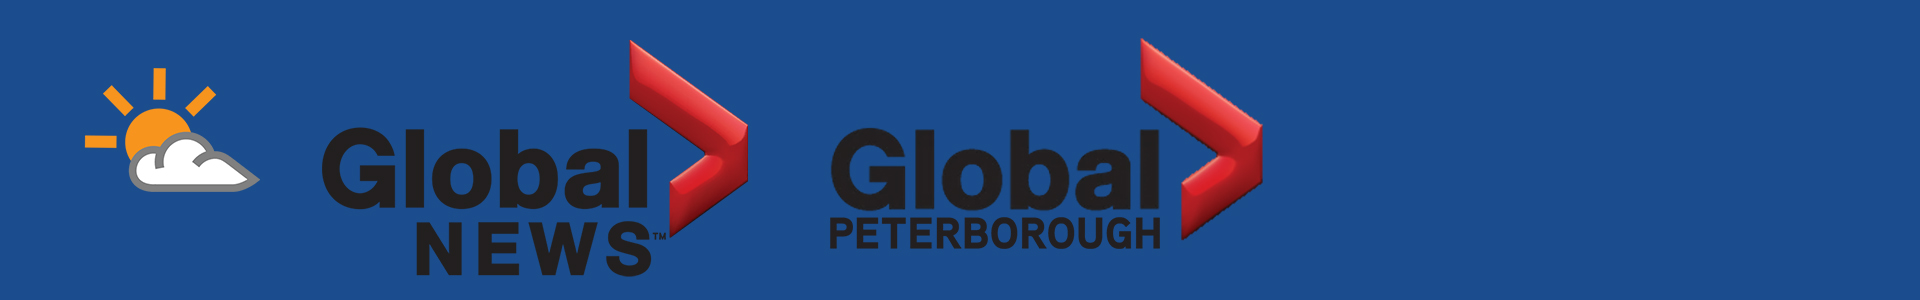 banner with logos for Global News and Global Peterborough CHEX television